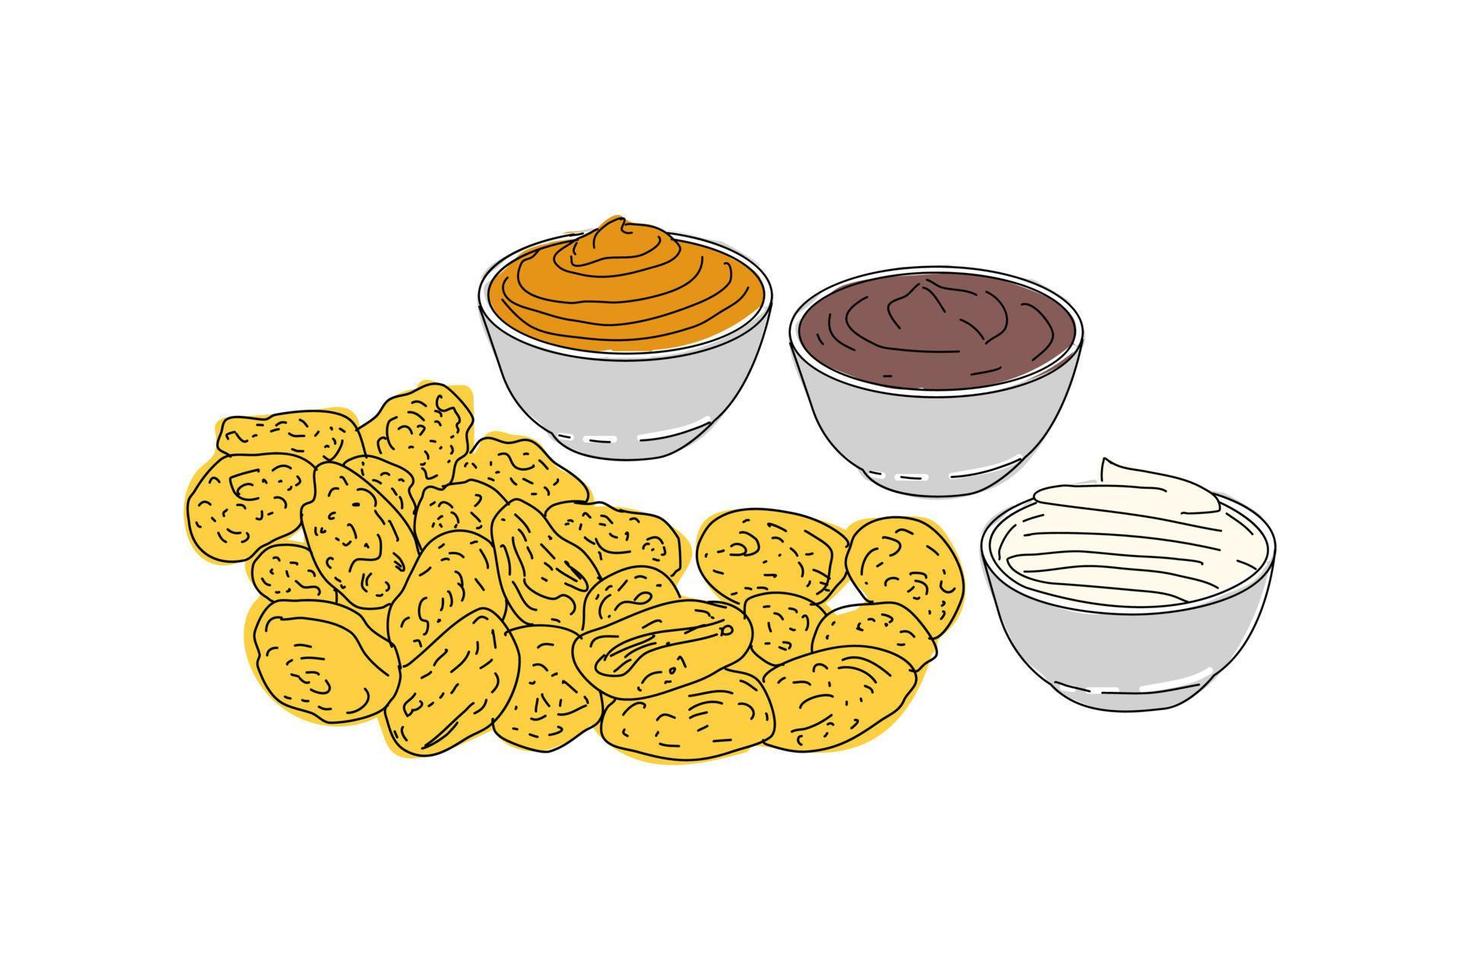 Fried mussels hand drawn vector design.